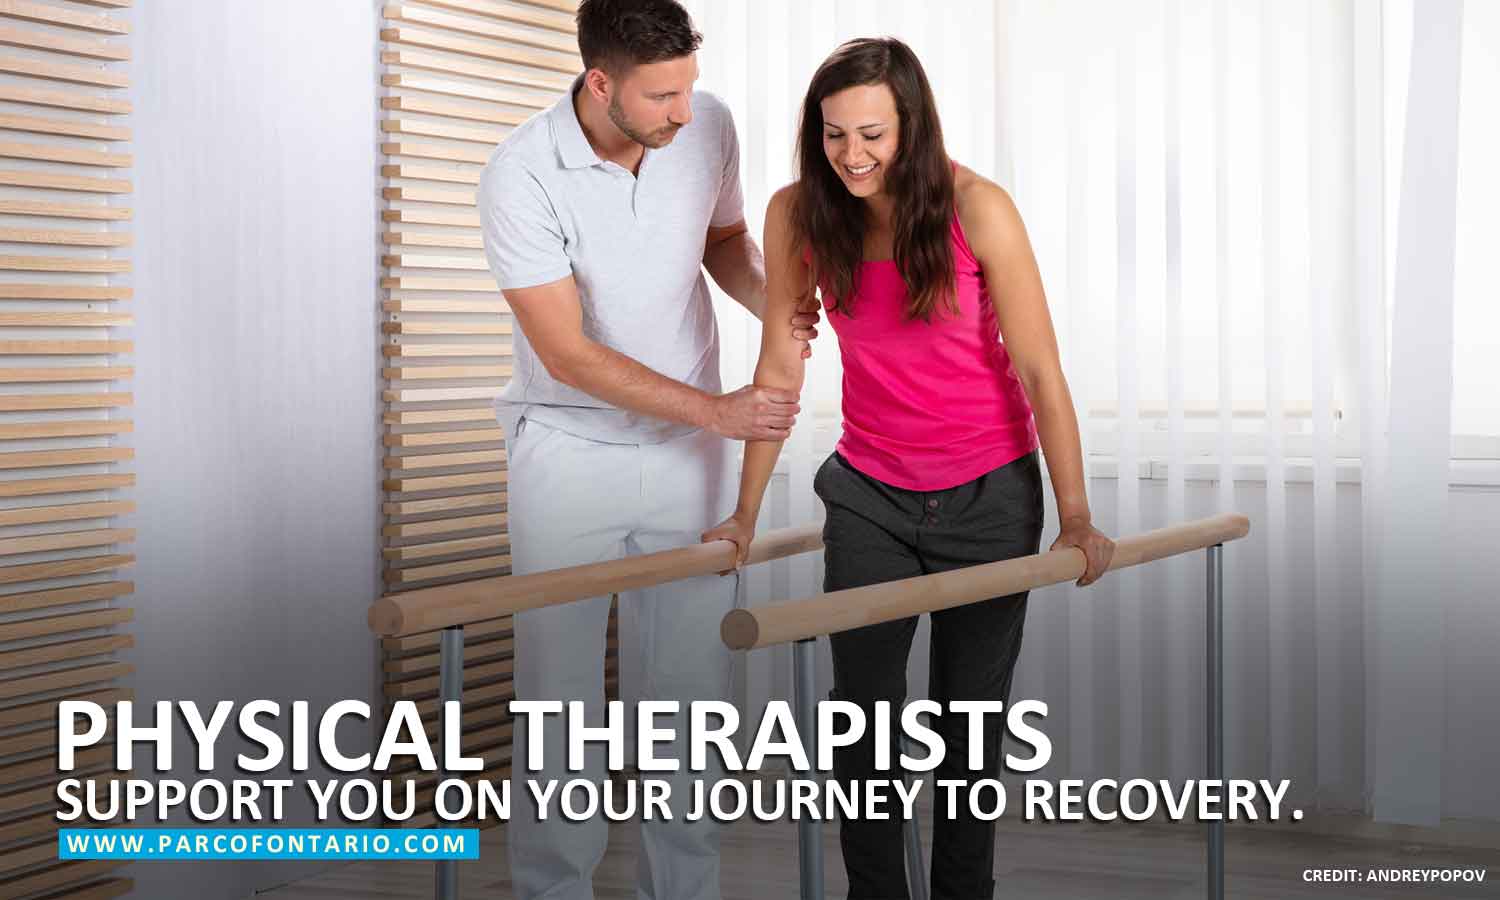  Physical therapists support you